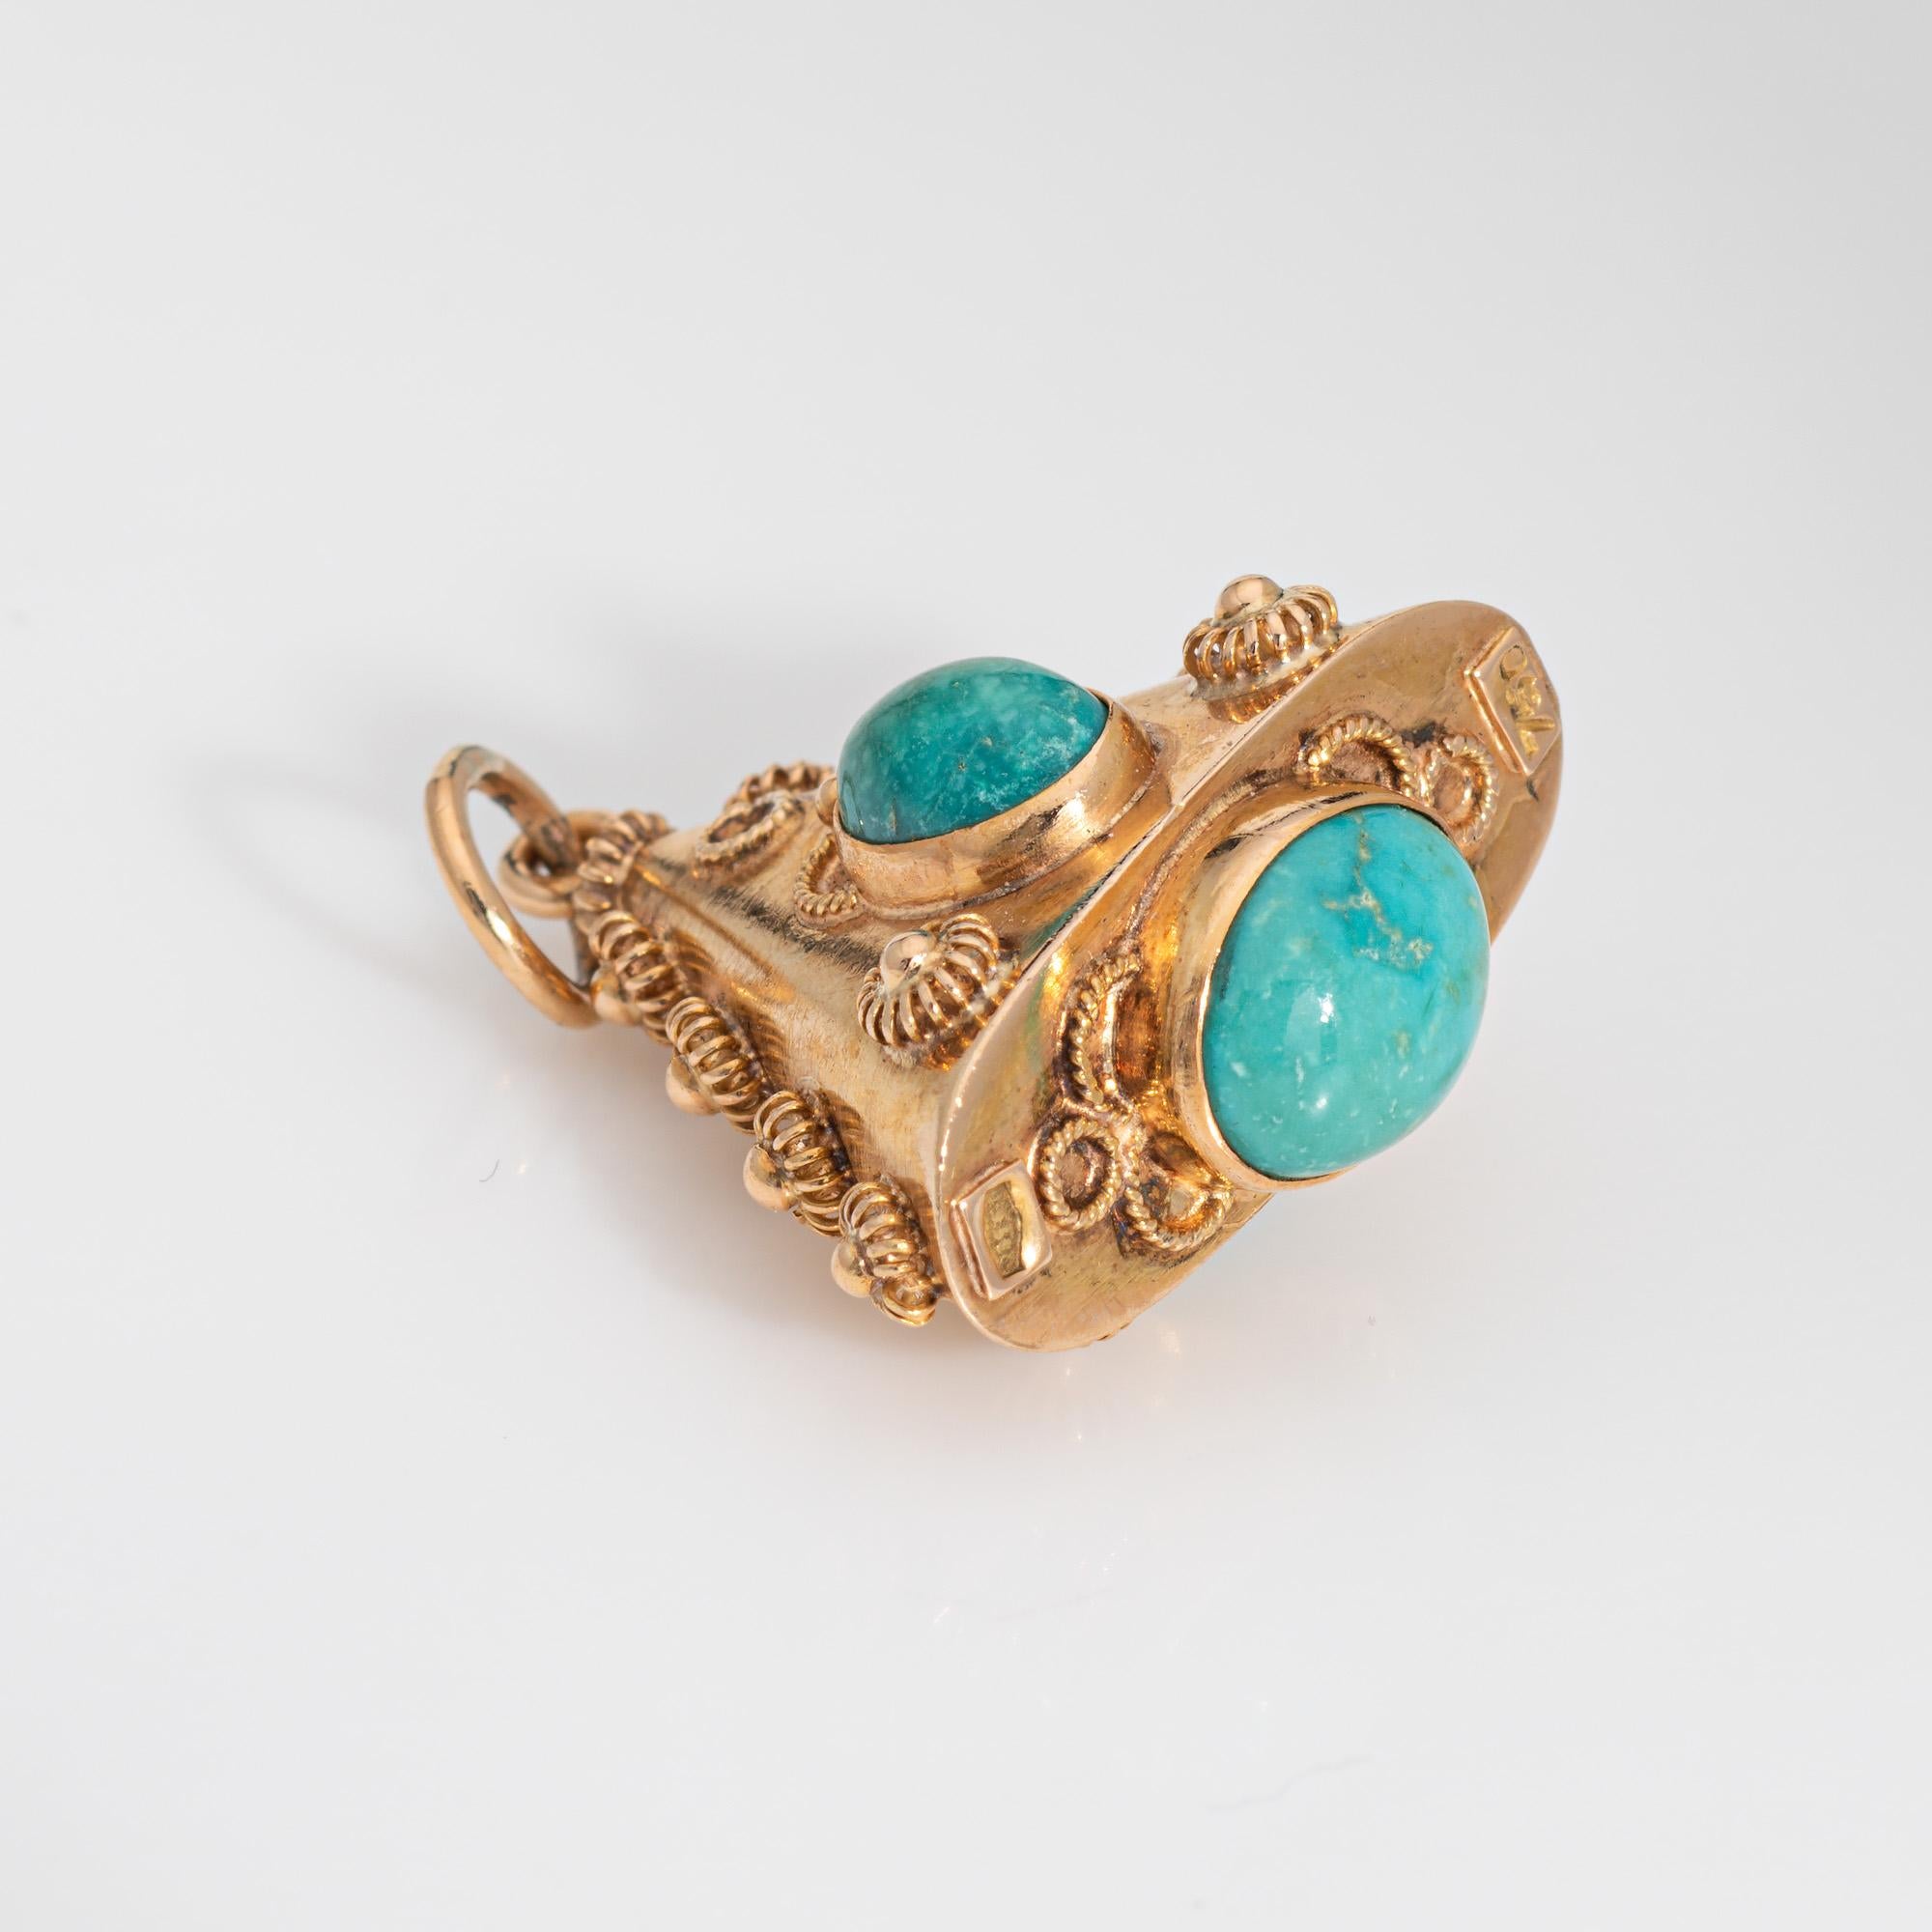 Finely detailed vintage turquoise charm crafted in 18k yellow gold (circa 1960s).  

Three cabochon cut pieces of turquoise measure 10mm x 8mm and 7mm x 5.5mm. The turquoise is in good condition and free of cracks or chips. 

The sweet charm